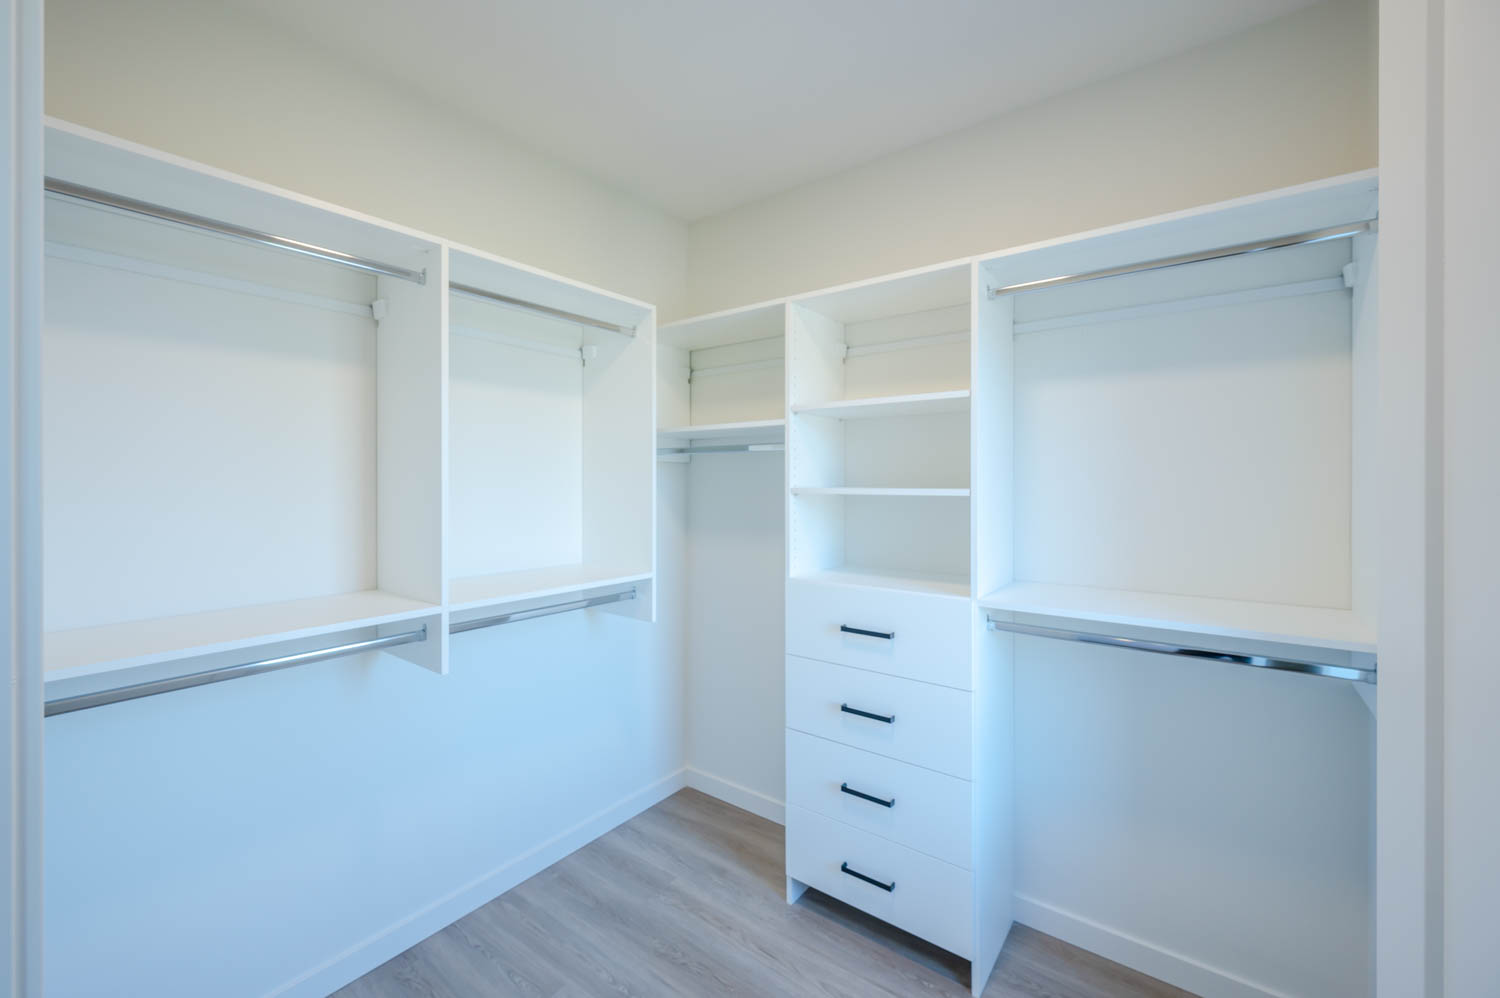 Walk-in closet with white shelves and drawers